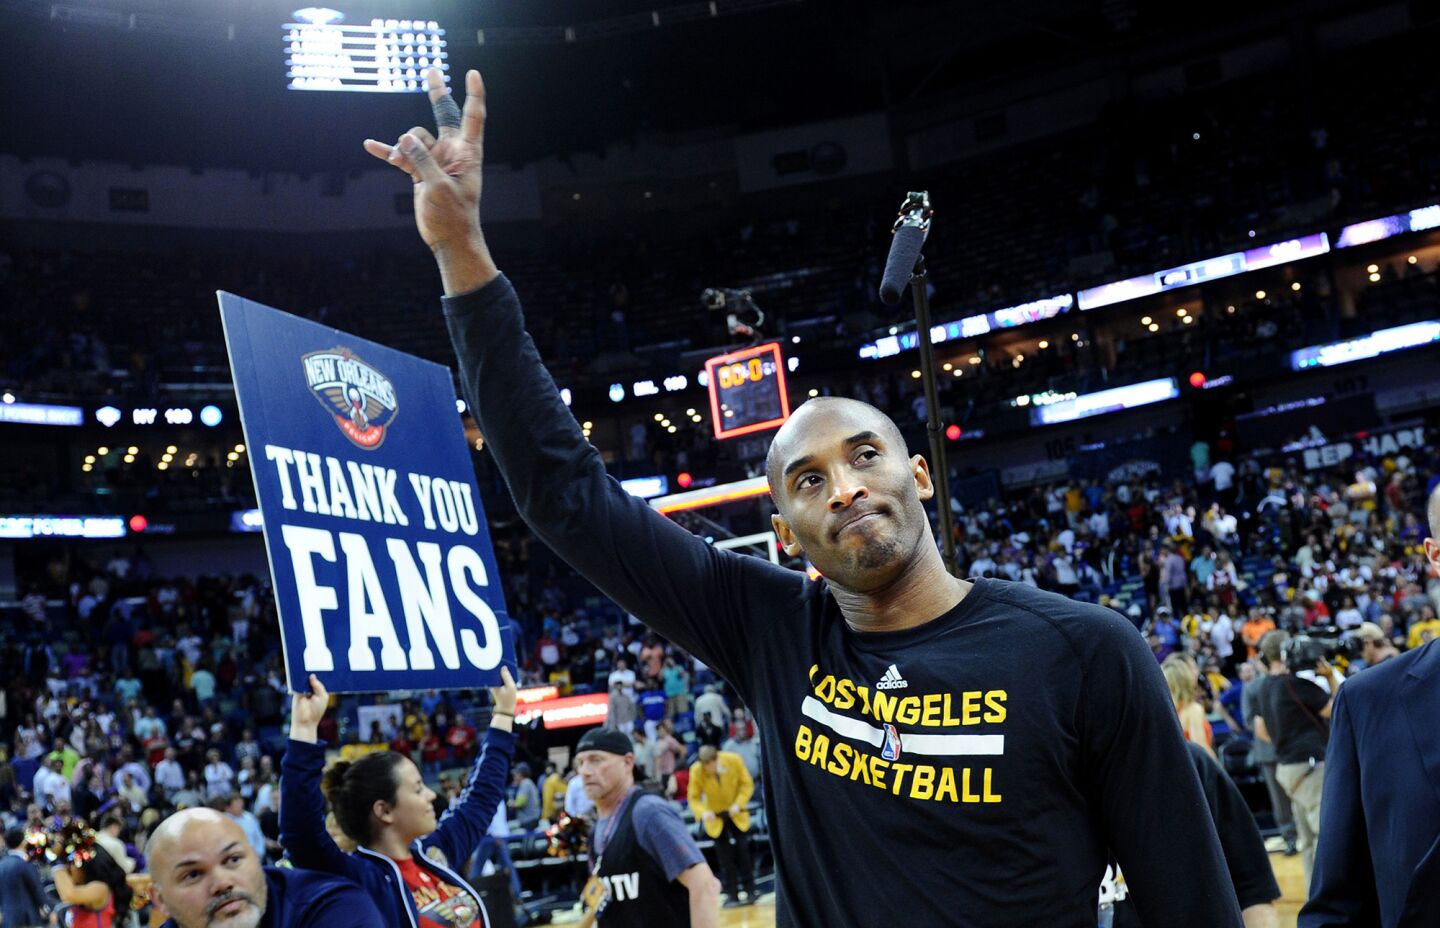 Kobe Bryant waves goodbye to fans as the Lakers leave the court following their loss to the Pelicans in the future Hall-of-Famers final game in New Orleans.